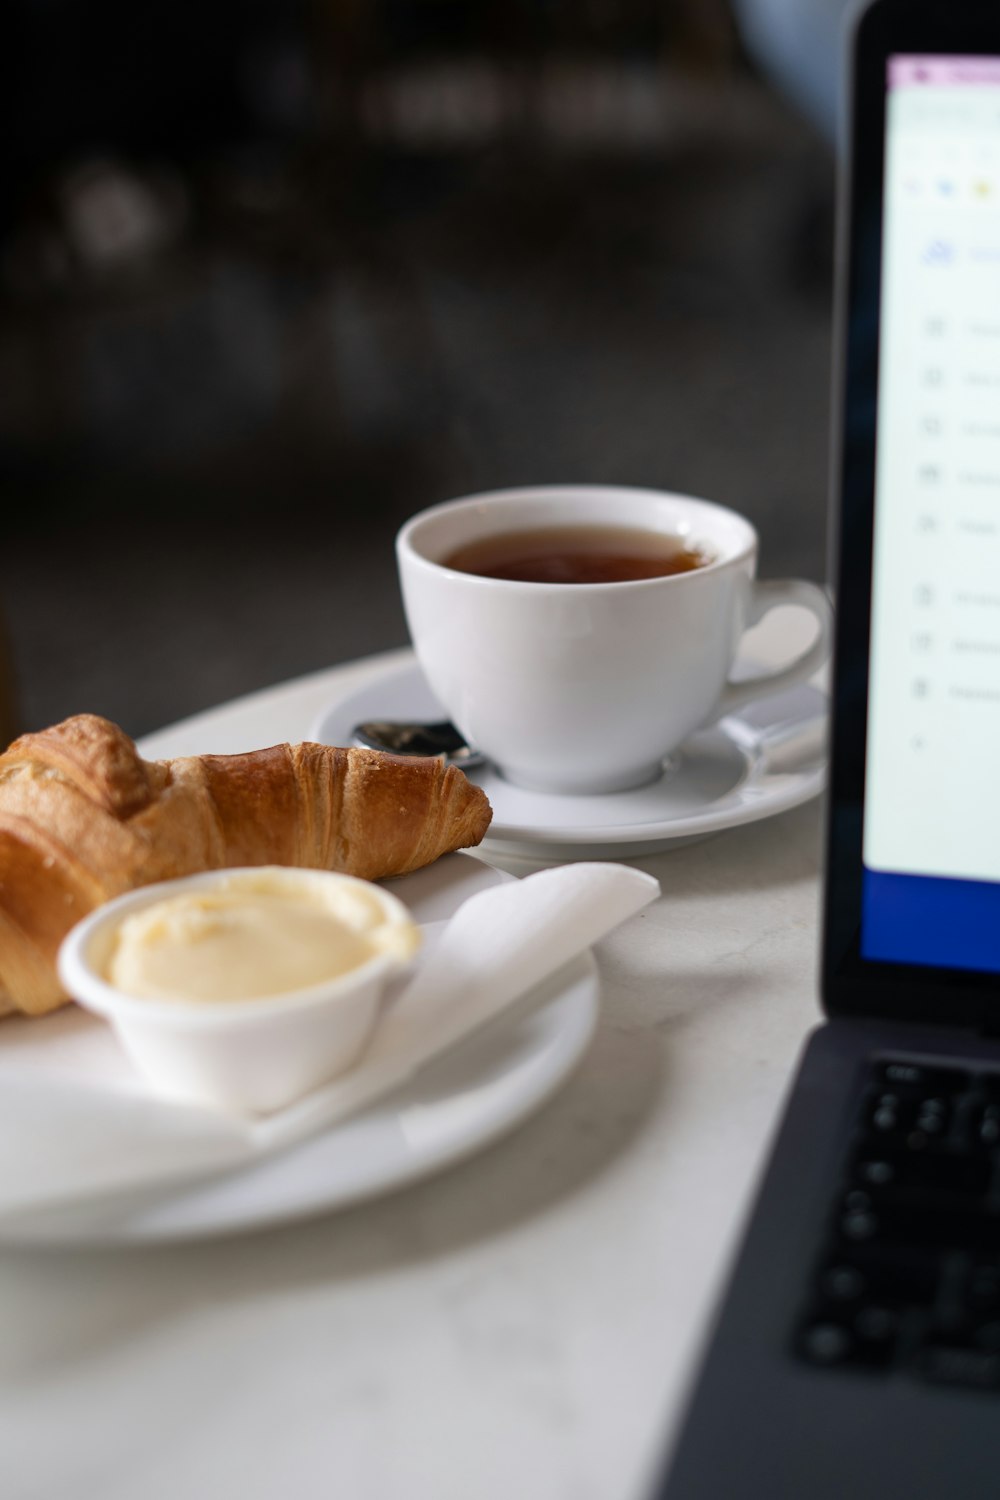 a cup of coffee next to a plate of pastries and a laptop